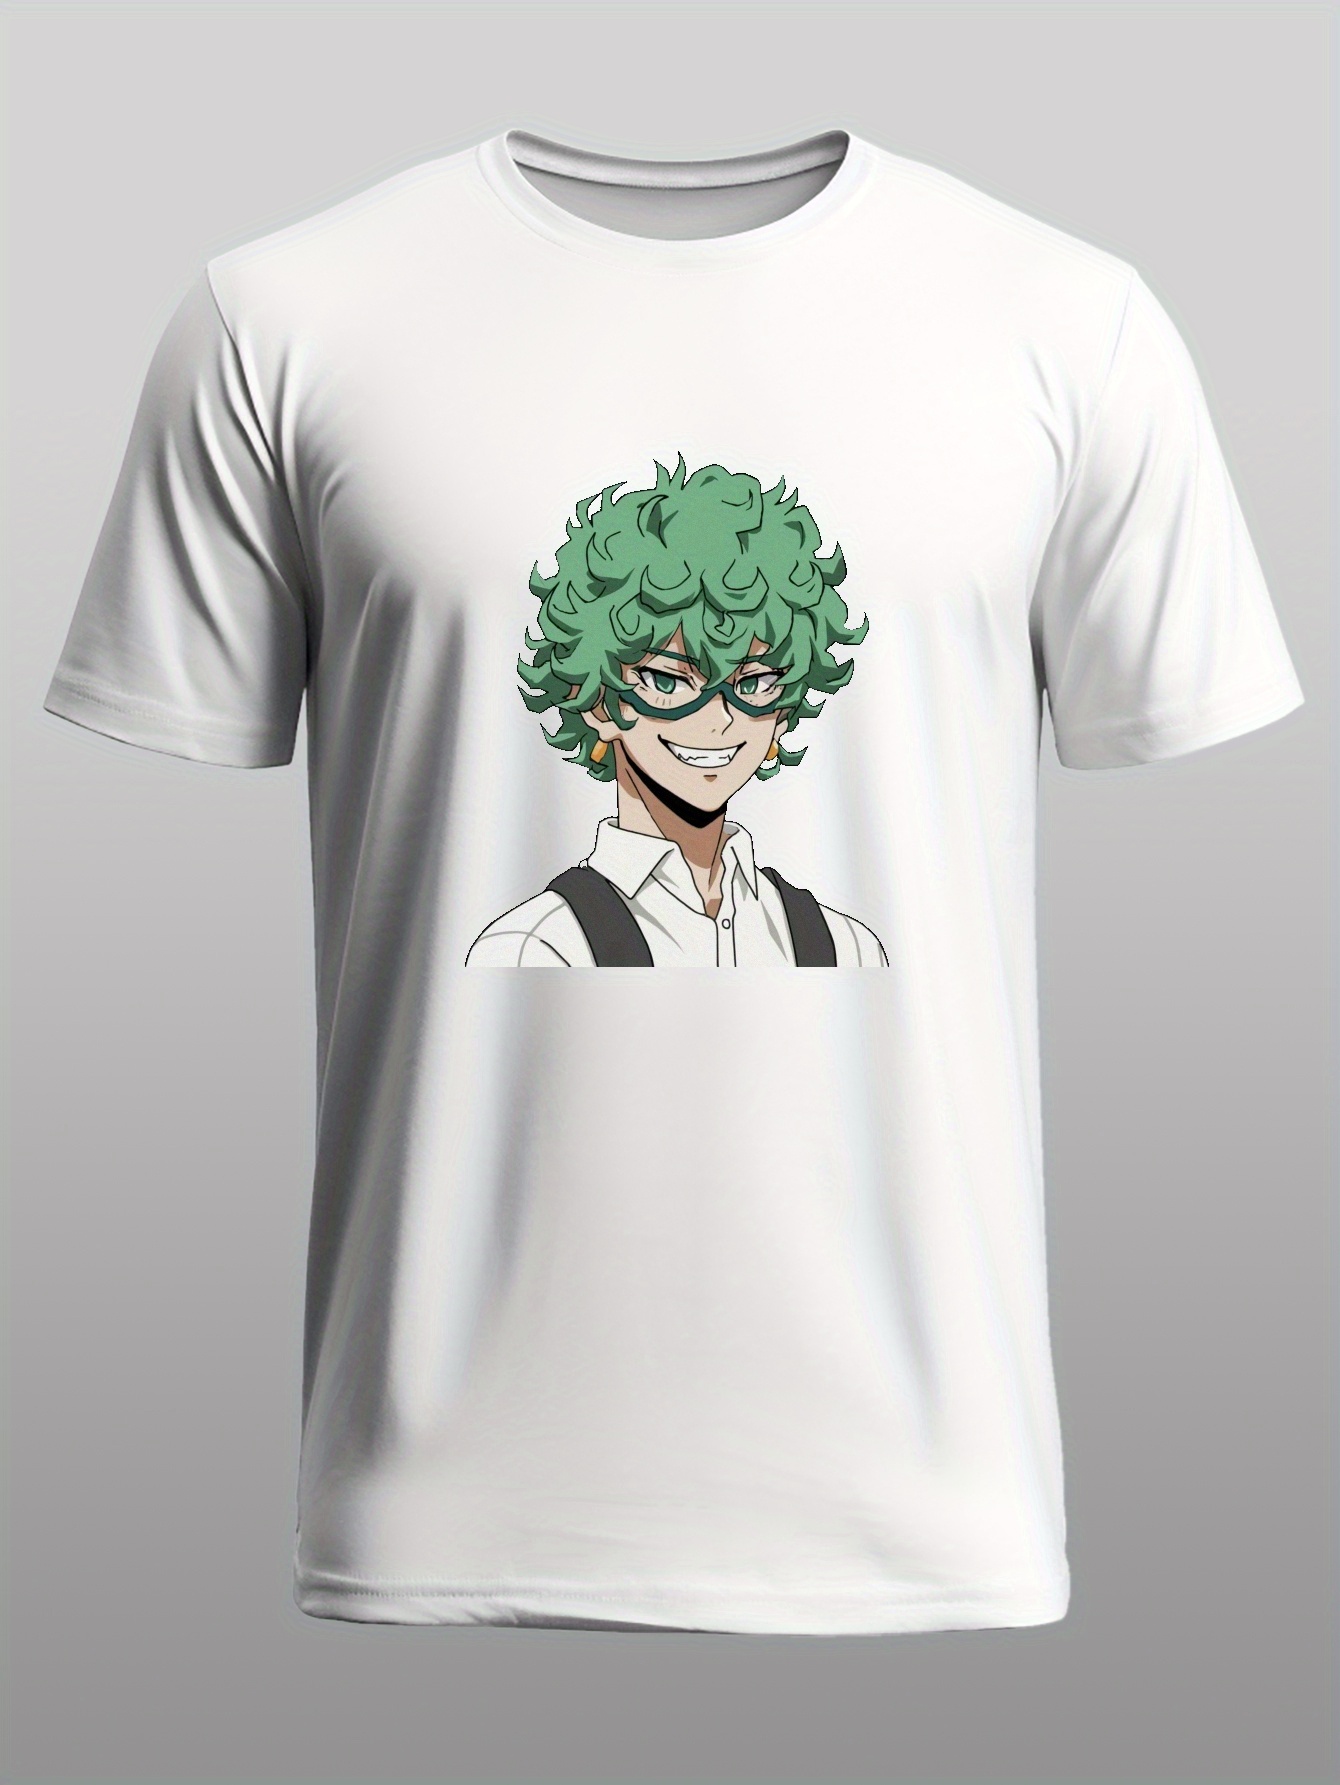 My Hero Academia Womens Cute Anime Anime Printed T Shirts Casual Harajuku  Tee For Summer, Oversized Japan Clothing From Blessmeat2022, $23.64